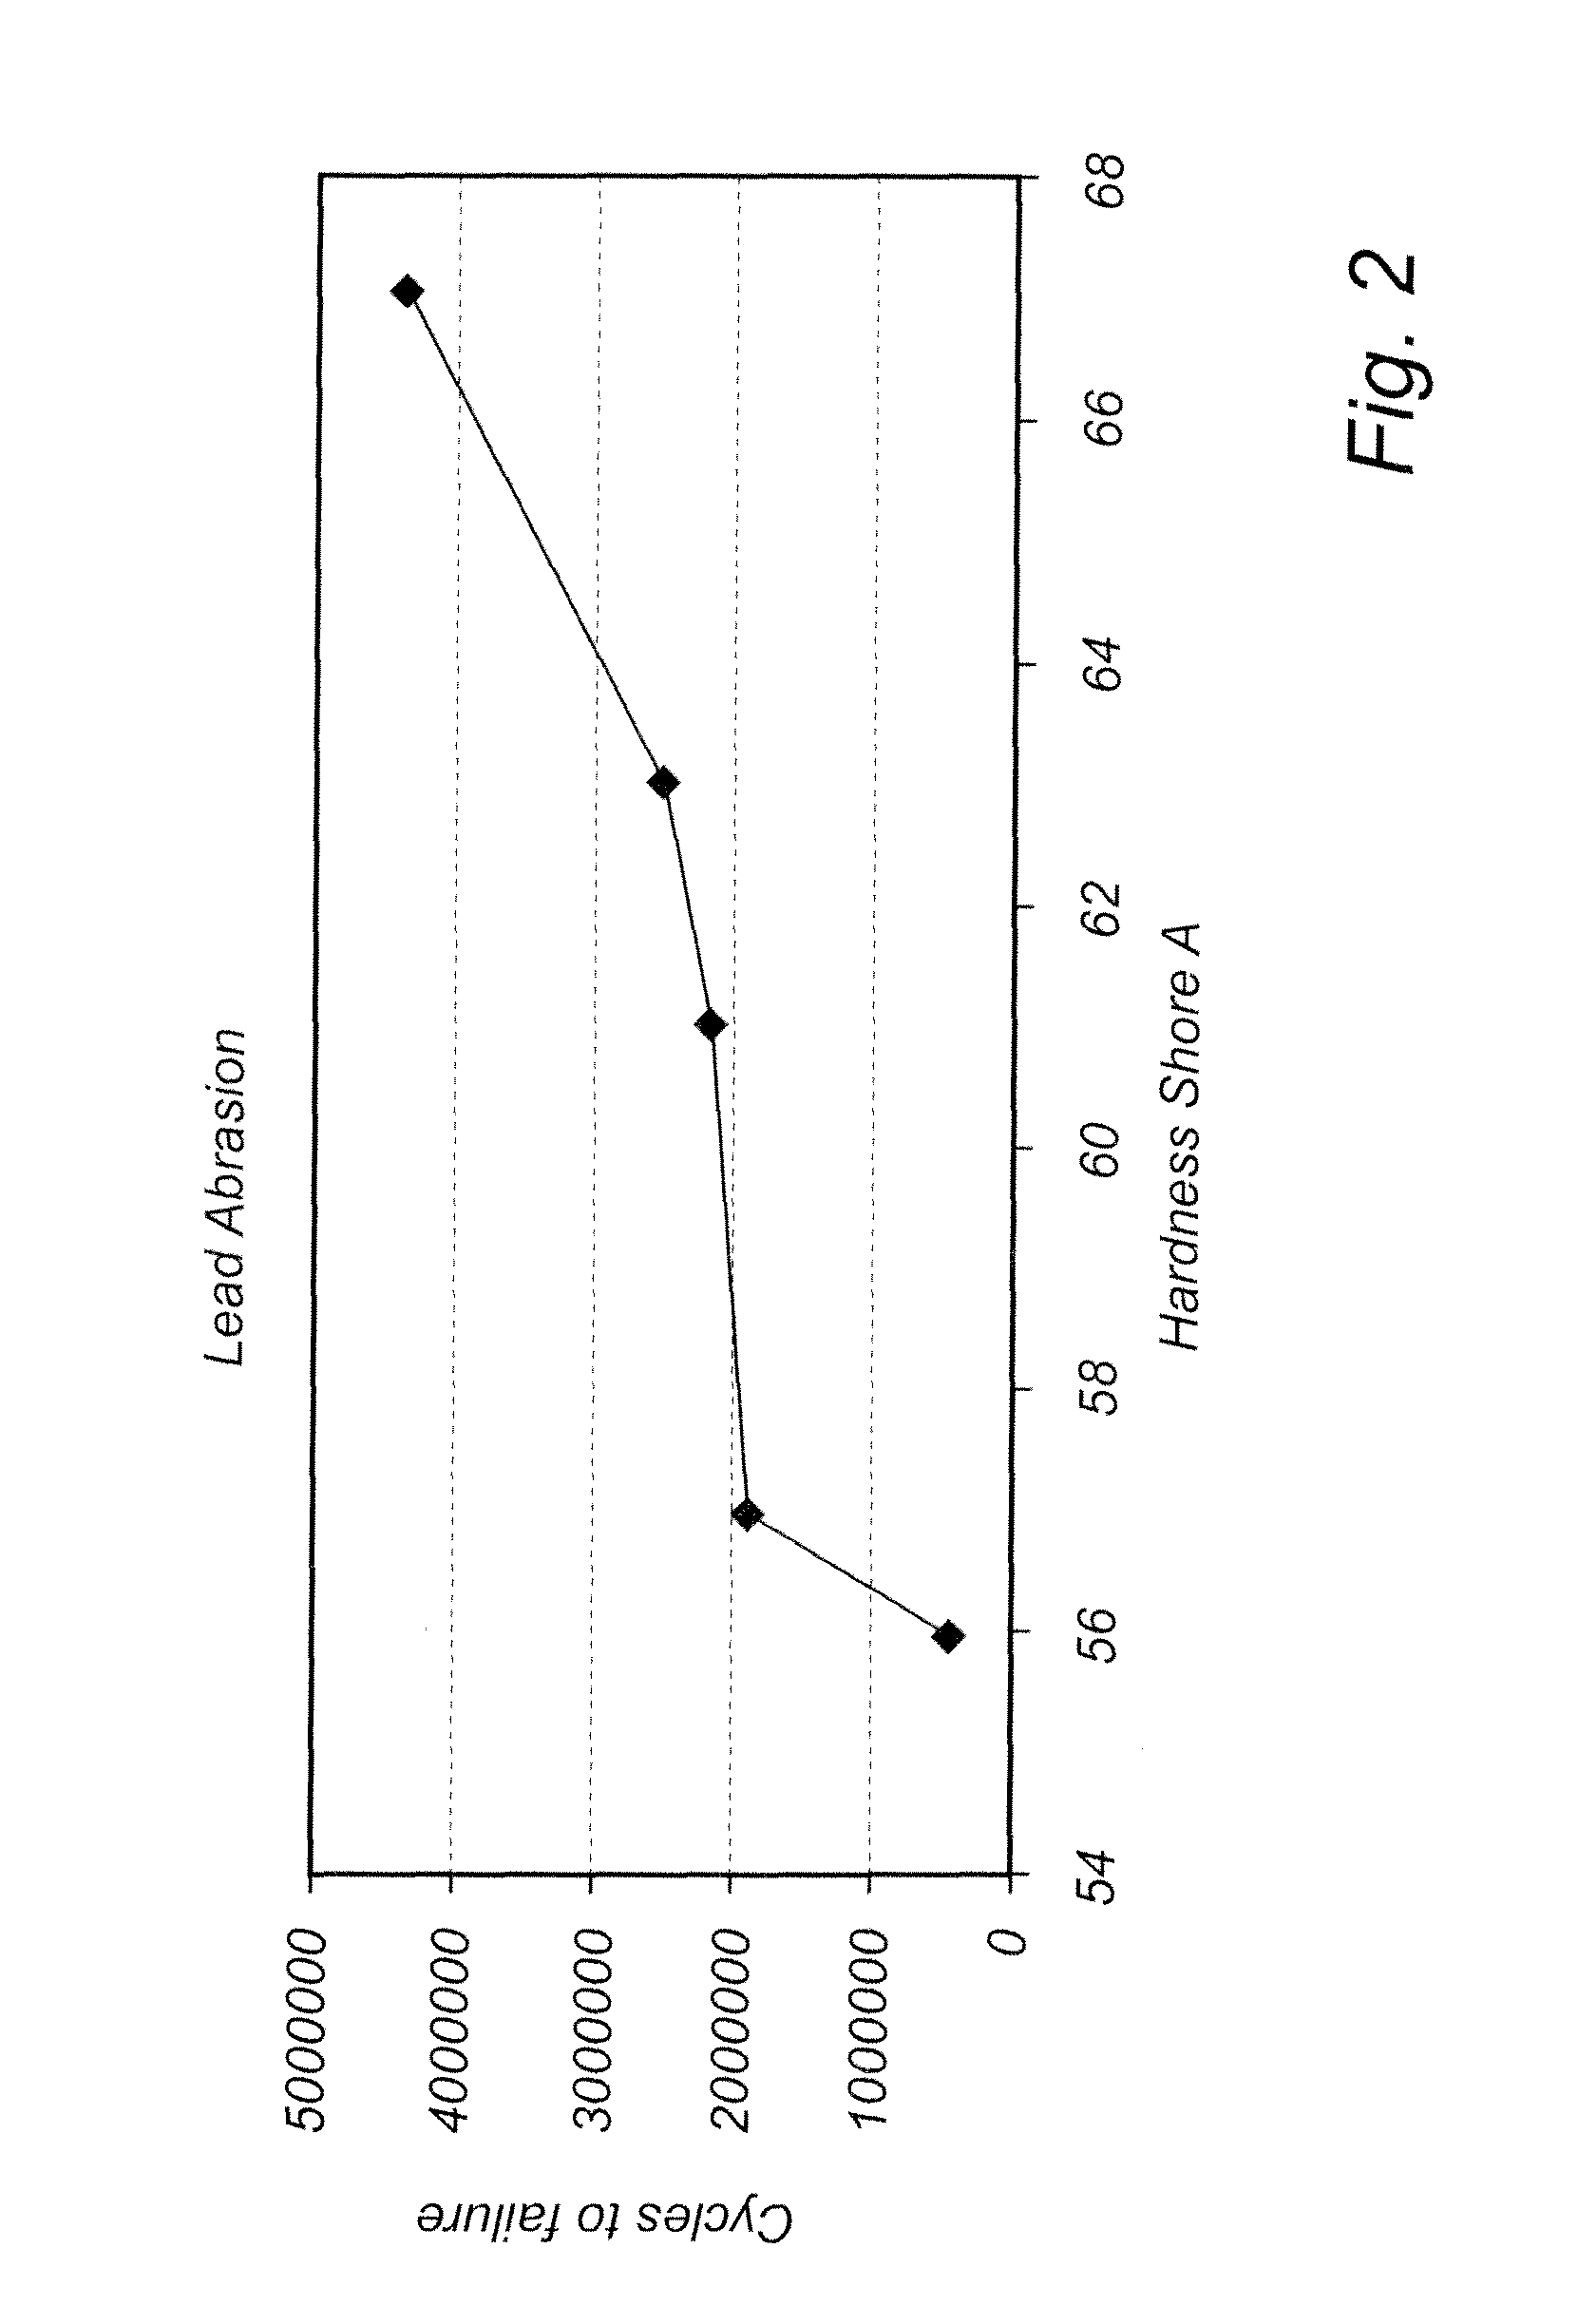 Implantable medical lead and method for manufacture thereof